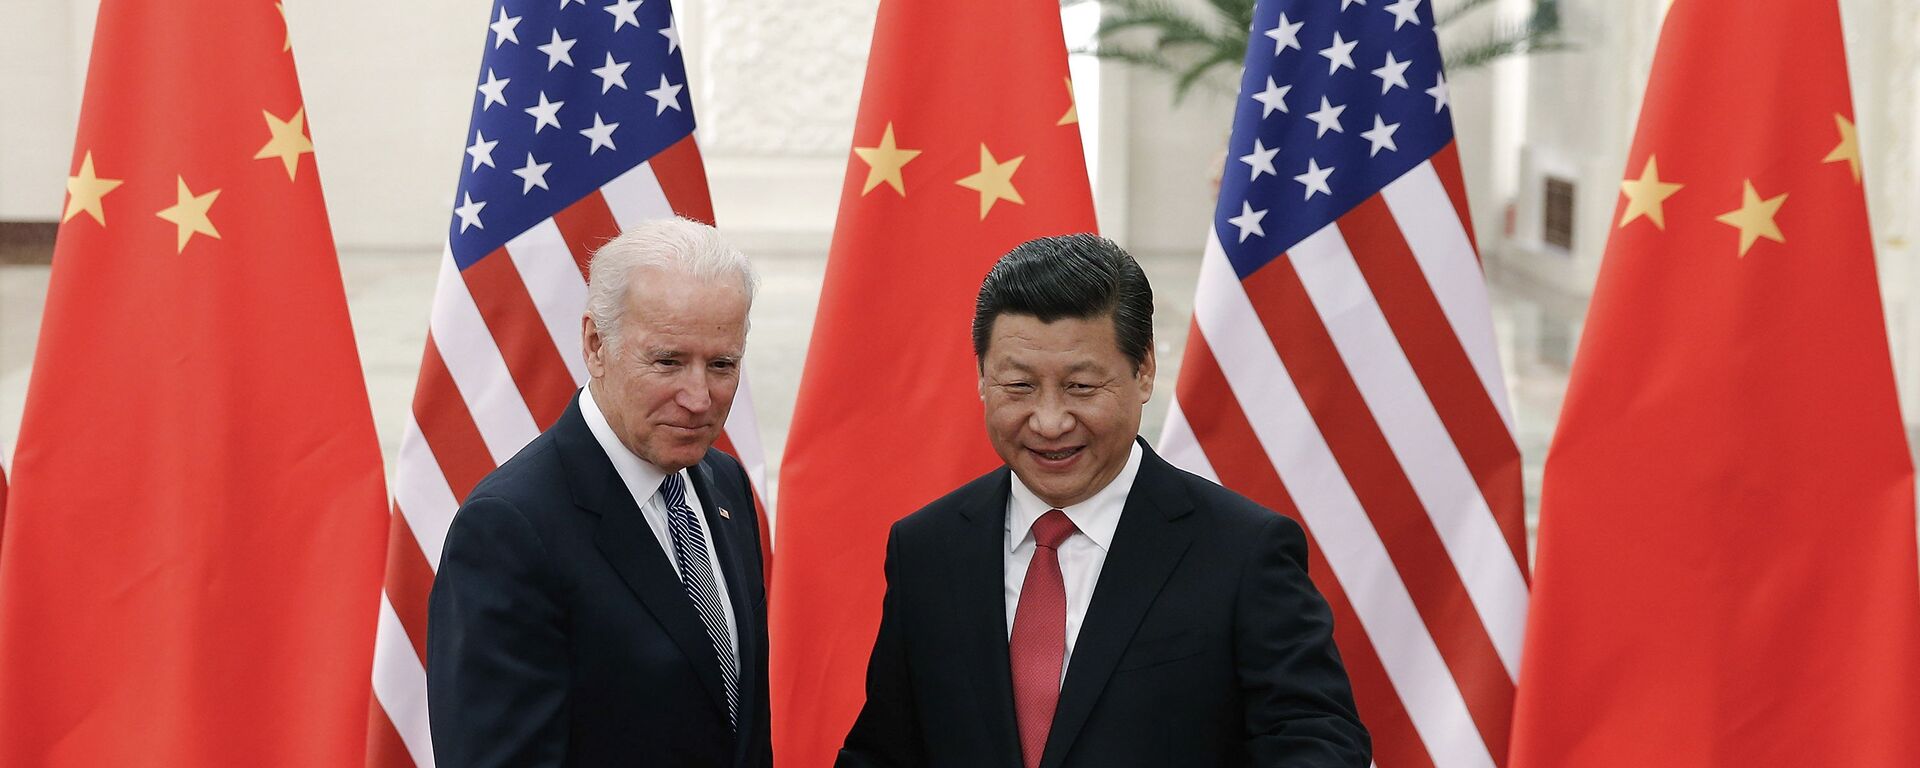 FILE - In this Dec. 4, 2013, file photo, Chinese President Xi Jinping, right, shakes hands with then U.S. Vice President Joe Biden as they pose for photos at the Great Hall of the People in Beijing. - Sputnik International, 1920, 07.10.2021